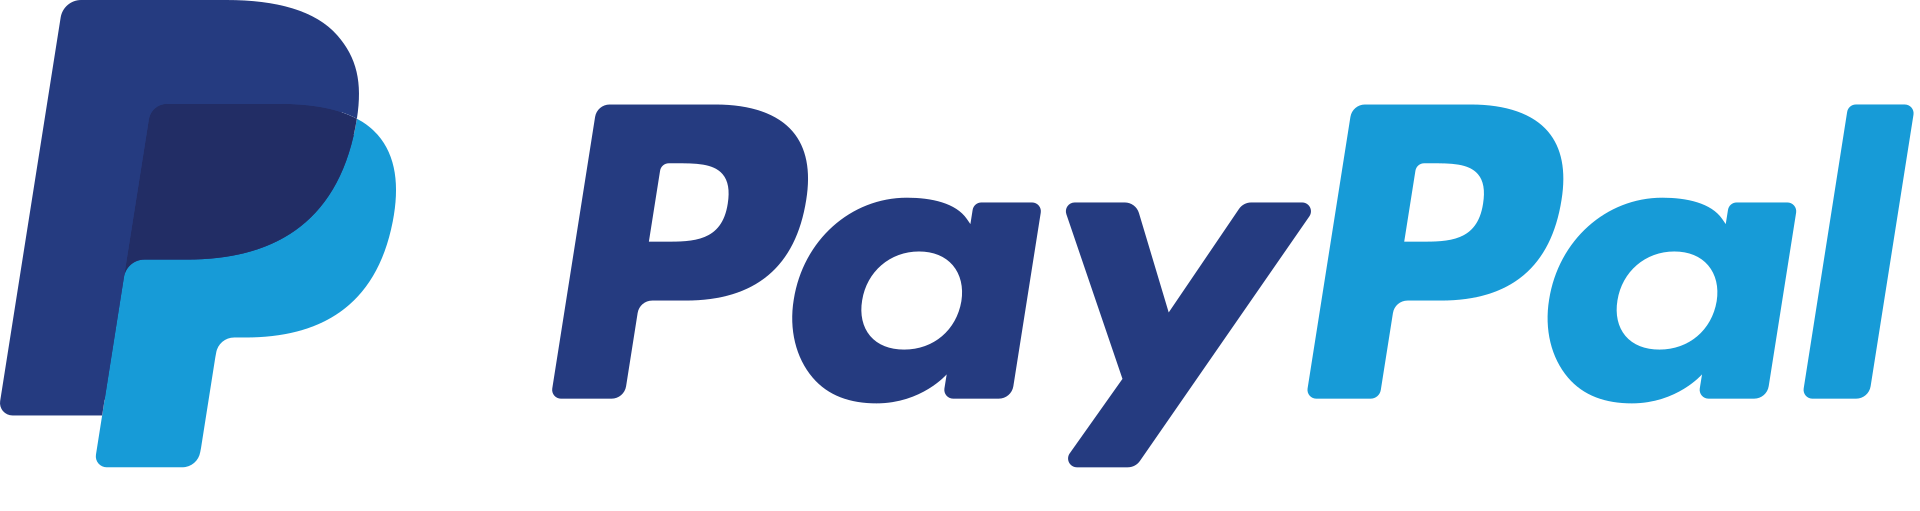 1920px-PayPal.svg